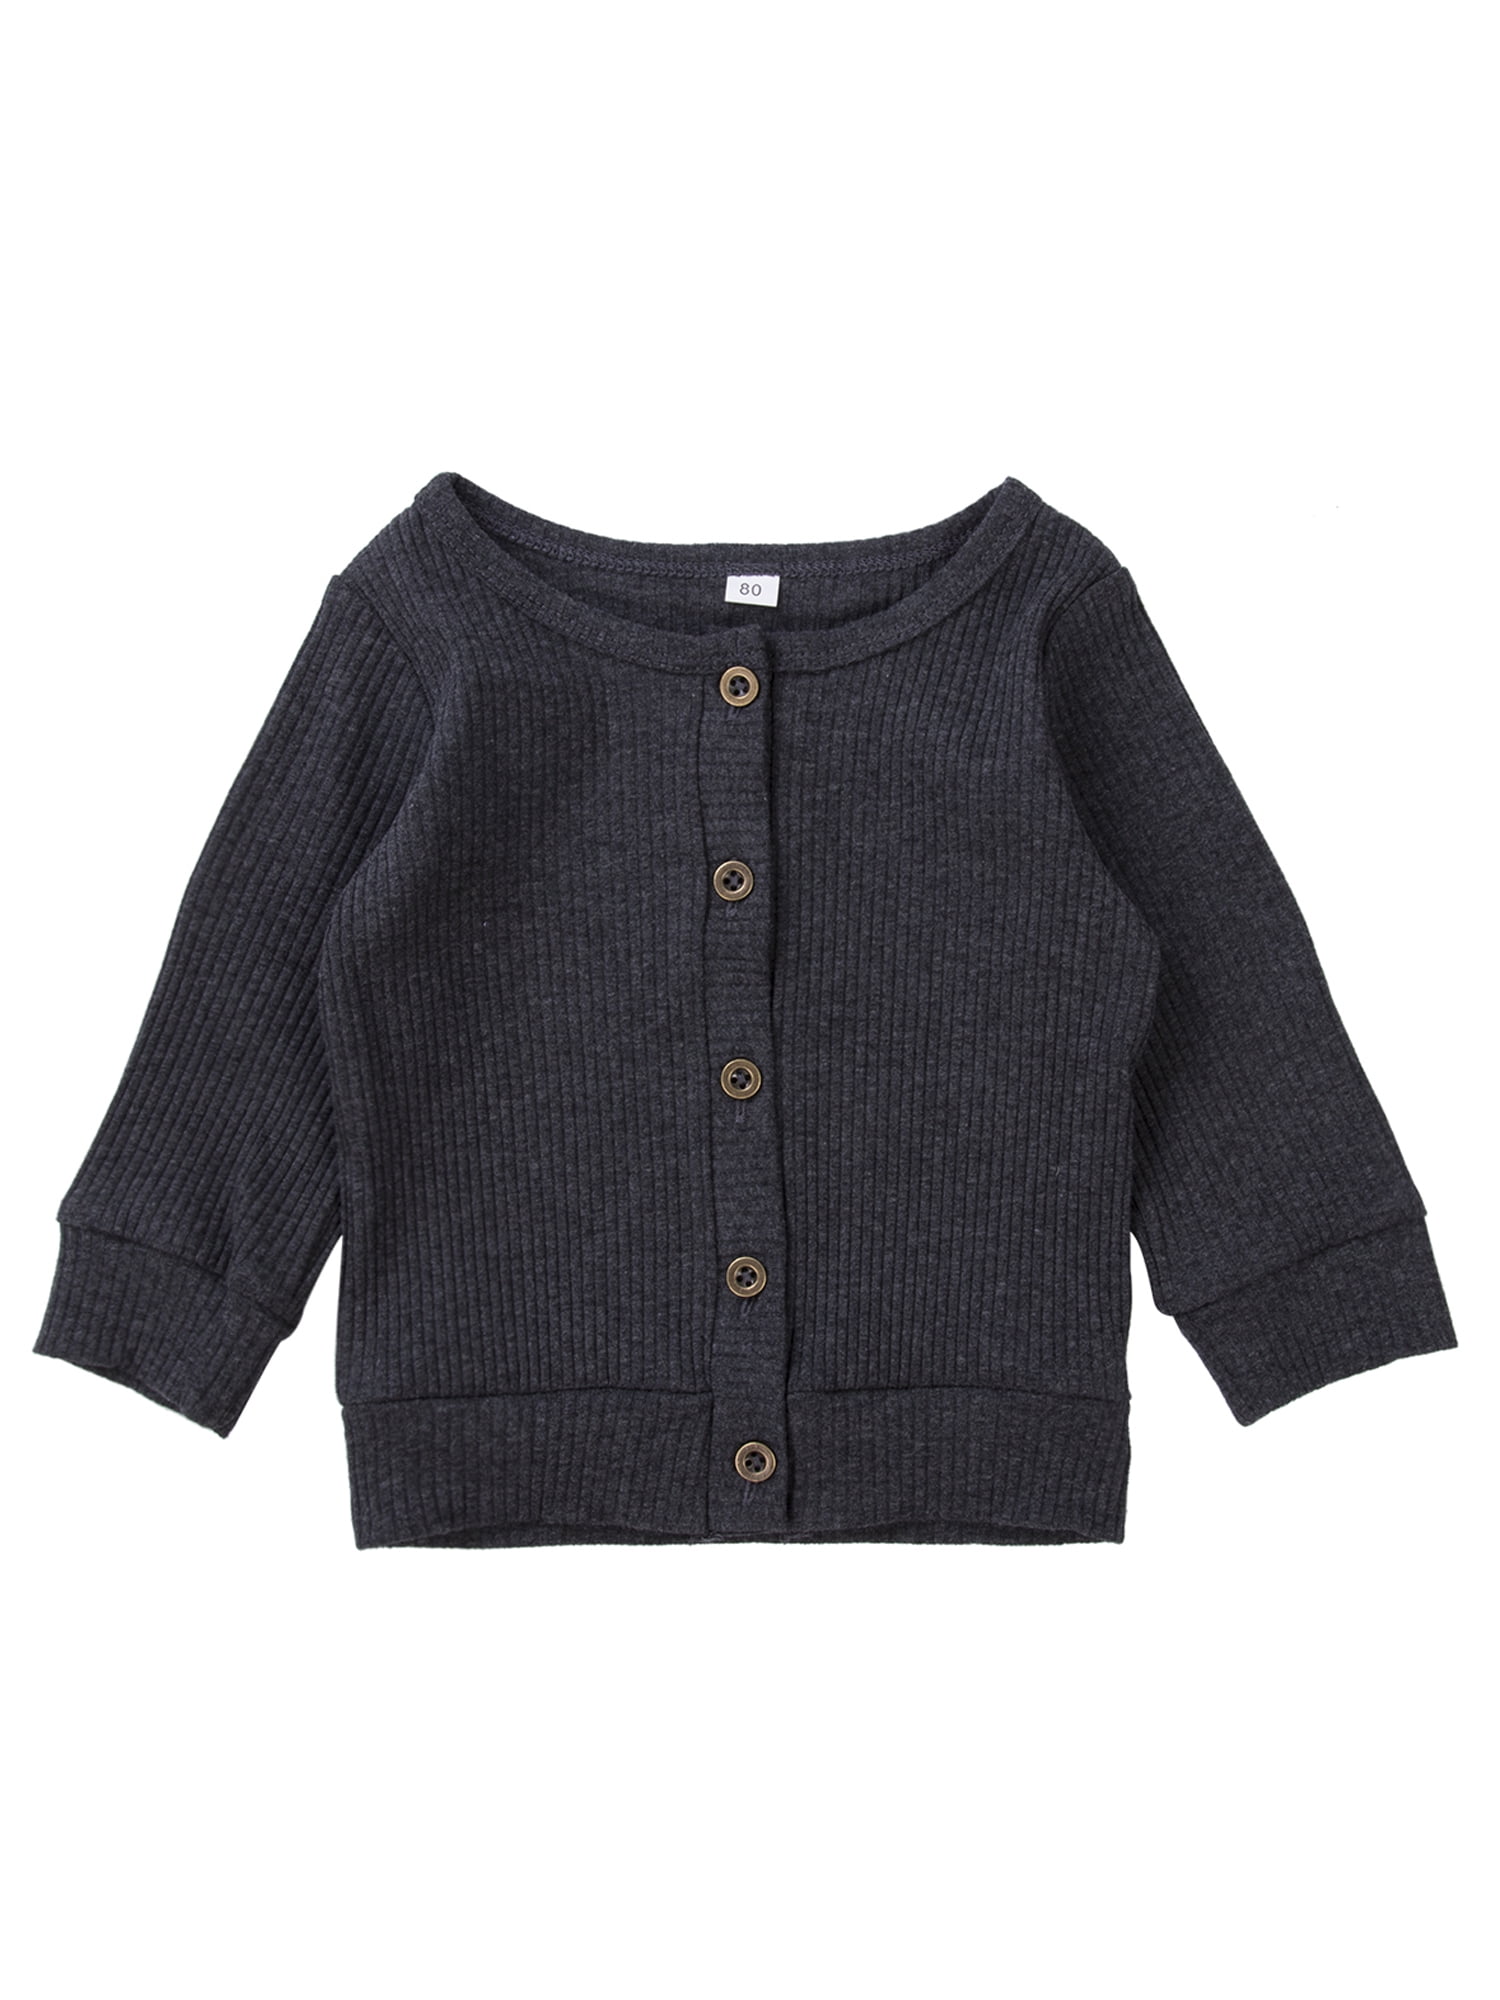 Infant Unisex Baby Girls Boys Button Down Knitwear Long Sleeve Soft Basic Knit Jacket Cardigan Sweater Coat Top Clothes